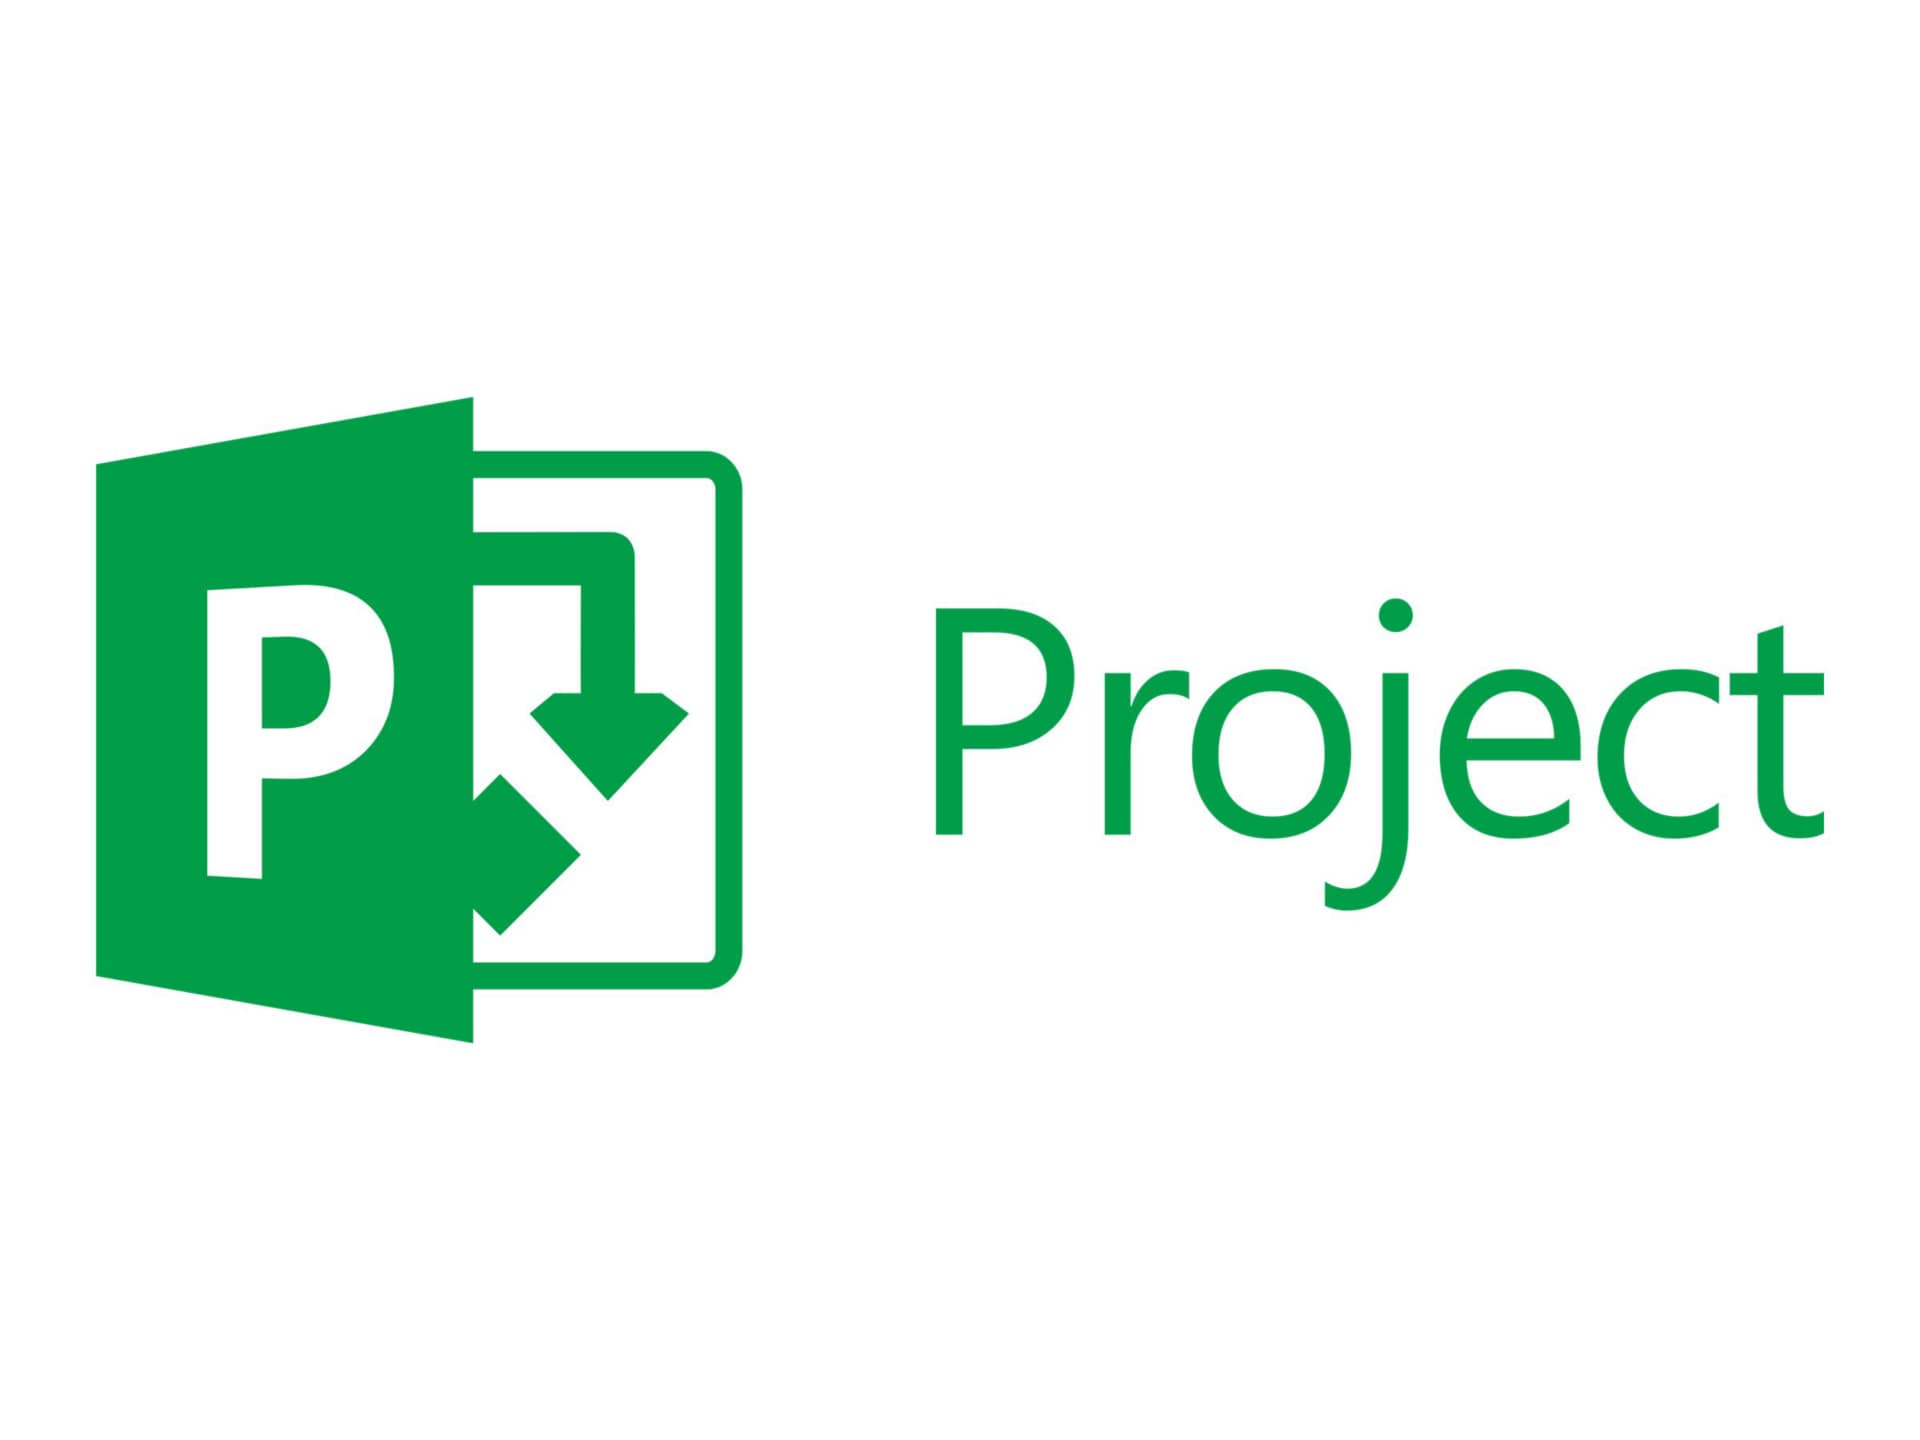 Microsoft Project Plan 3 - subscription license - 1 user